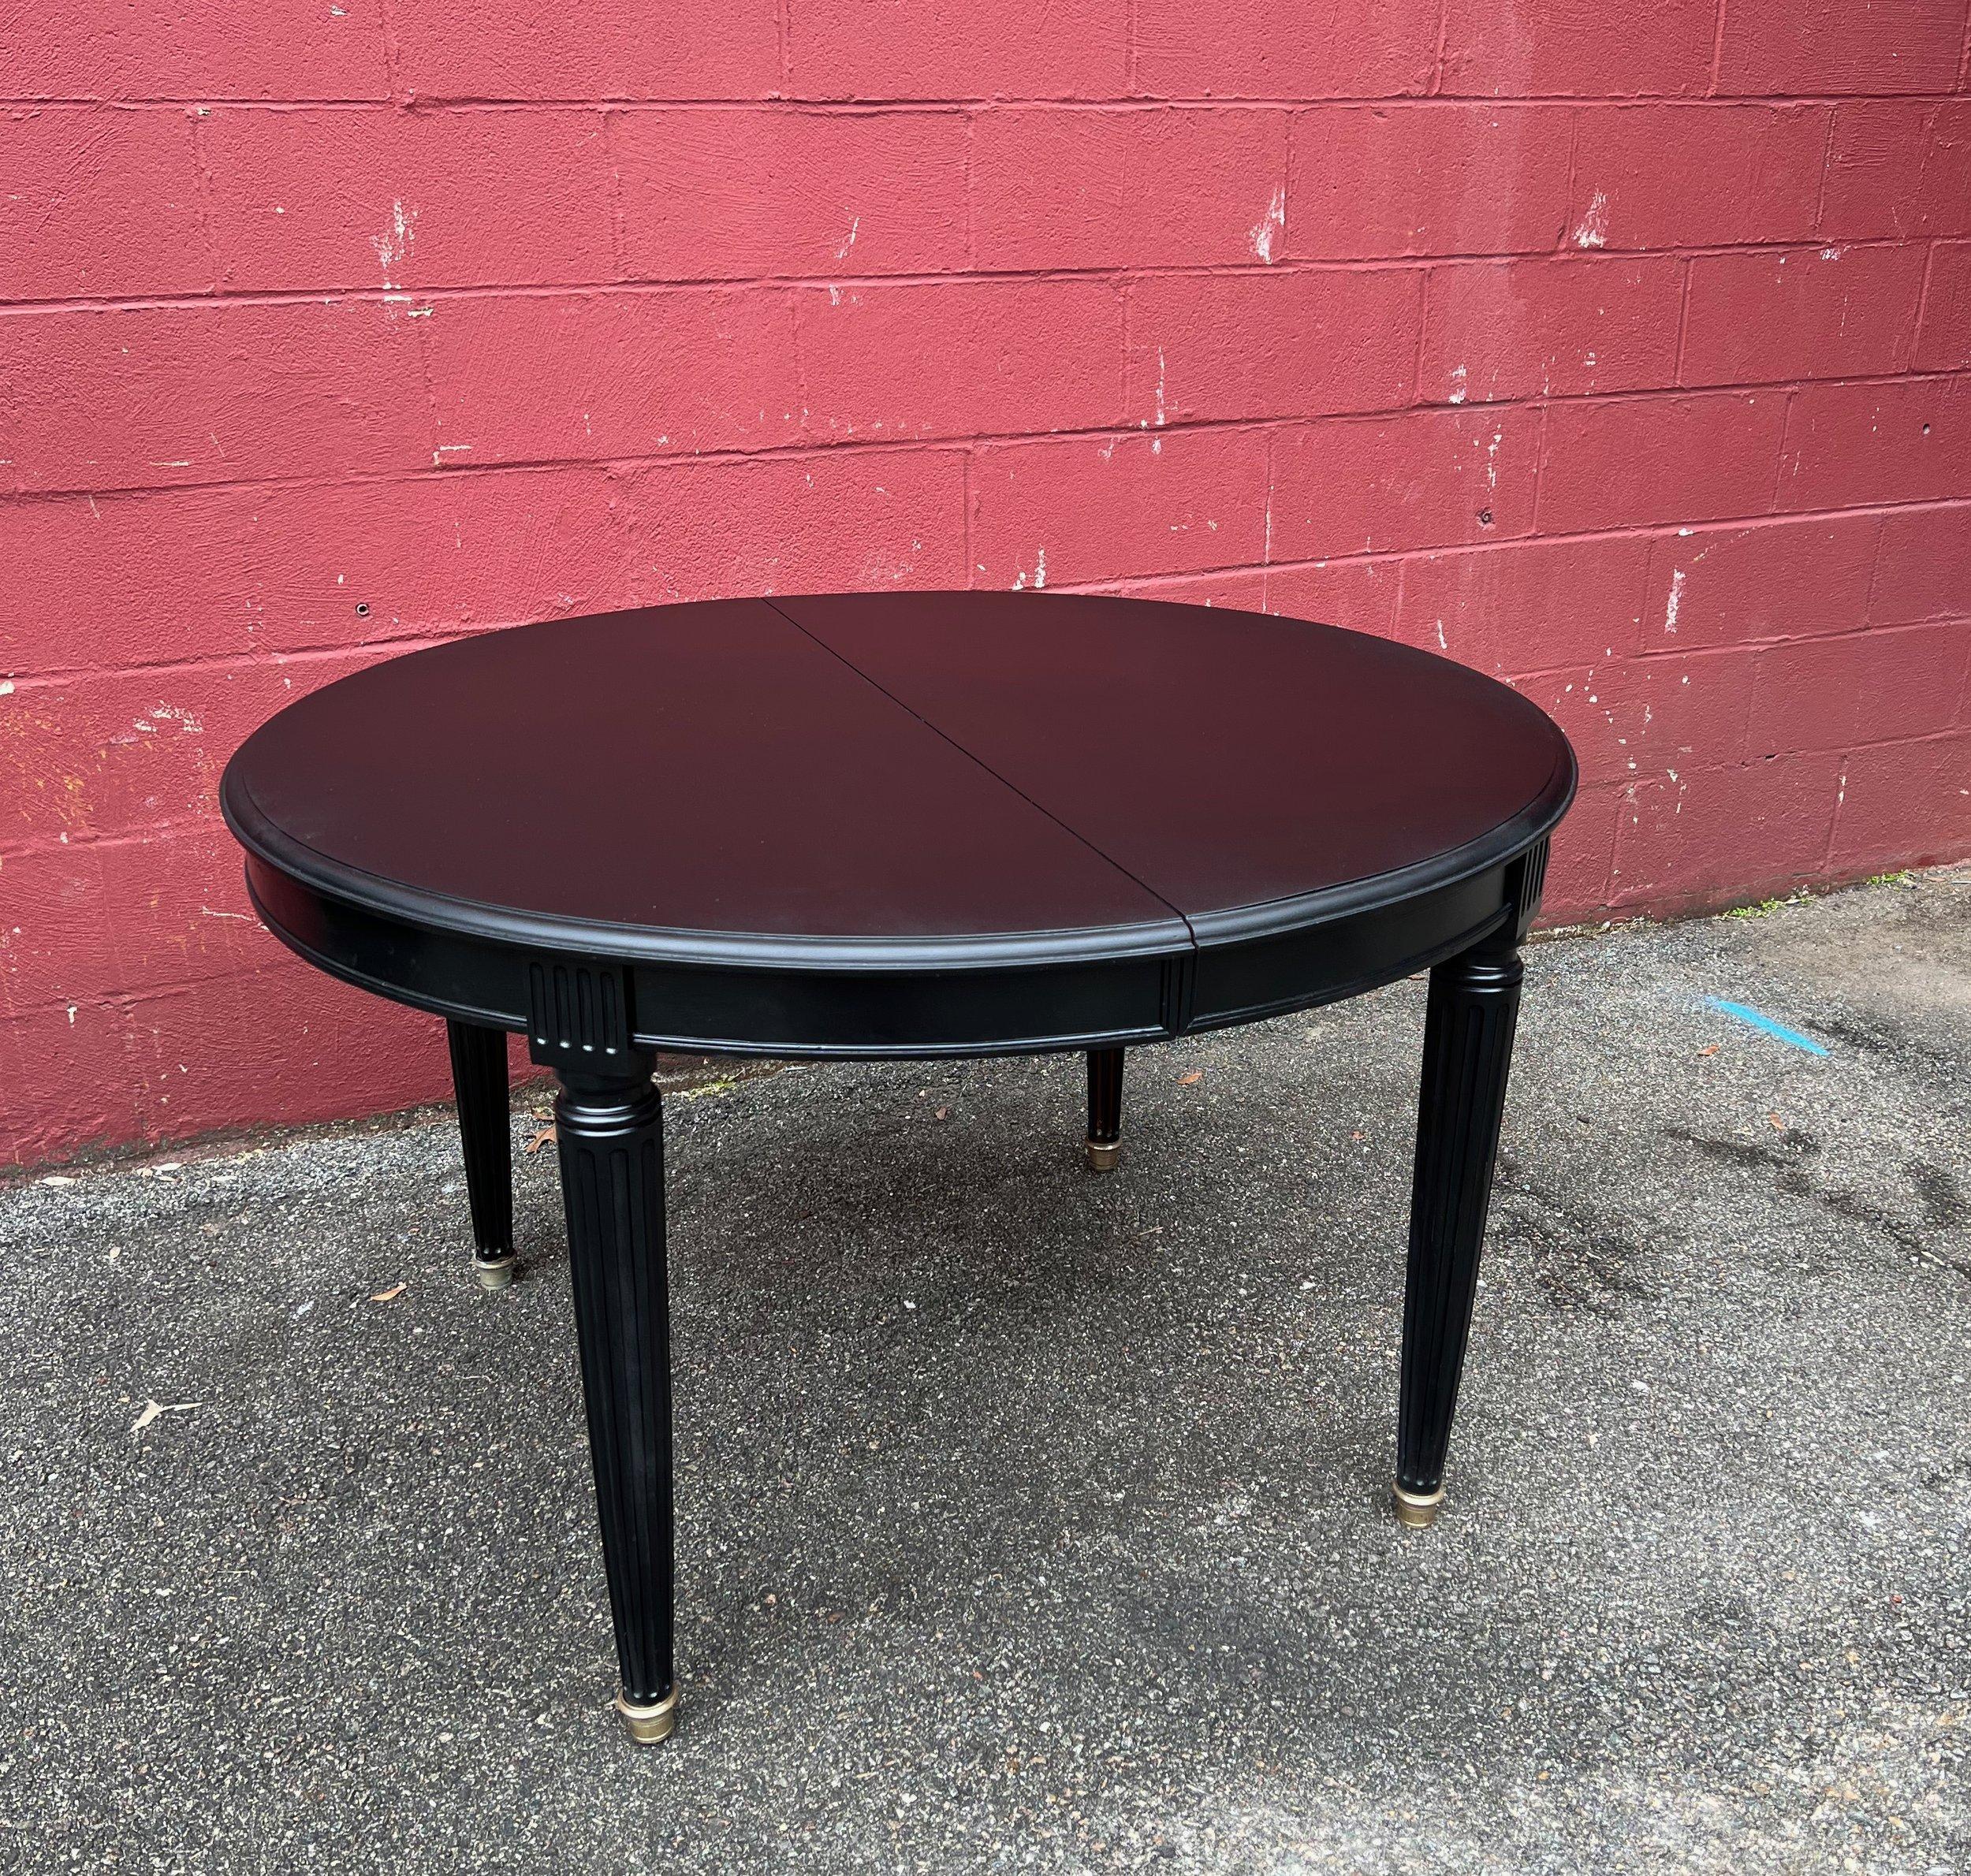 This elegant circular French 1940s neoclassical style mahogany veneered dining table features graceful tapered legs on brass sabots and it is has been recently refinished in a rich deep ebony. The table is equipped with stretchers that allow for two